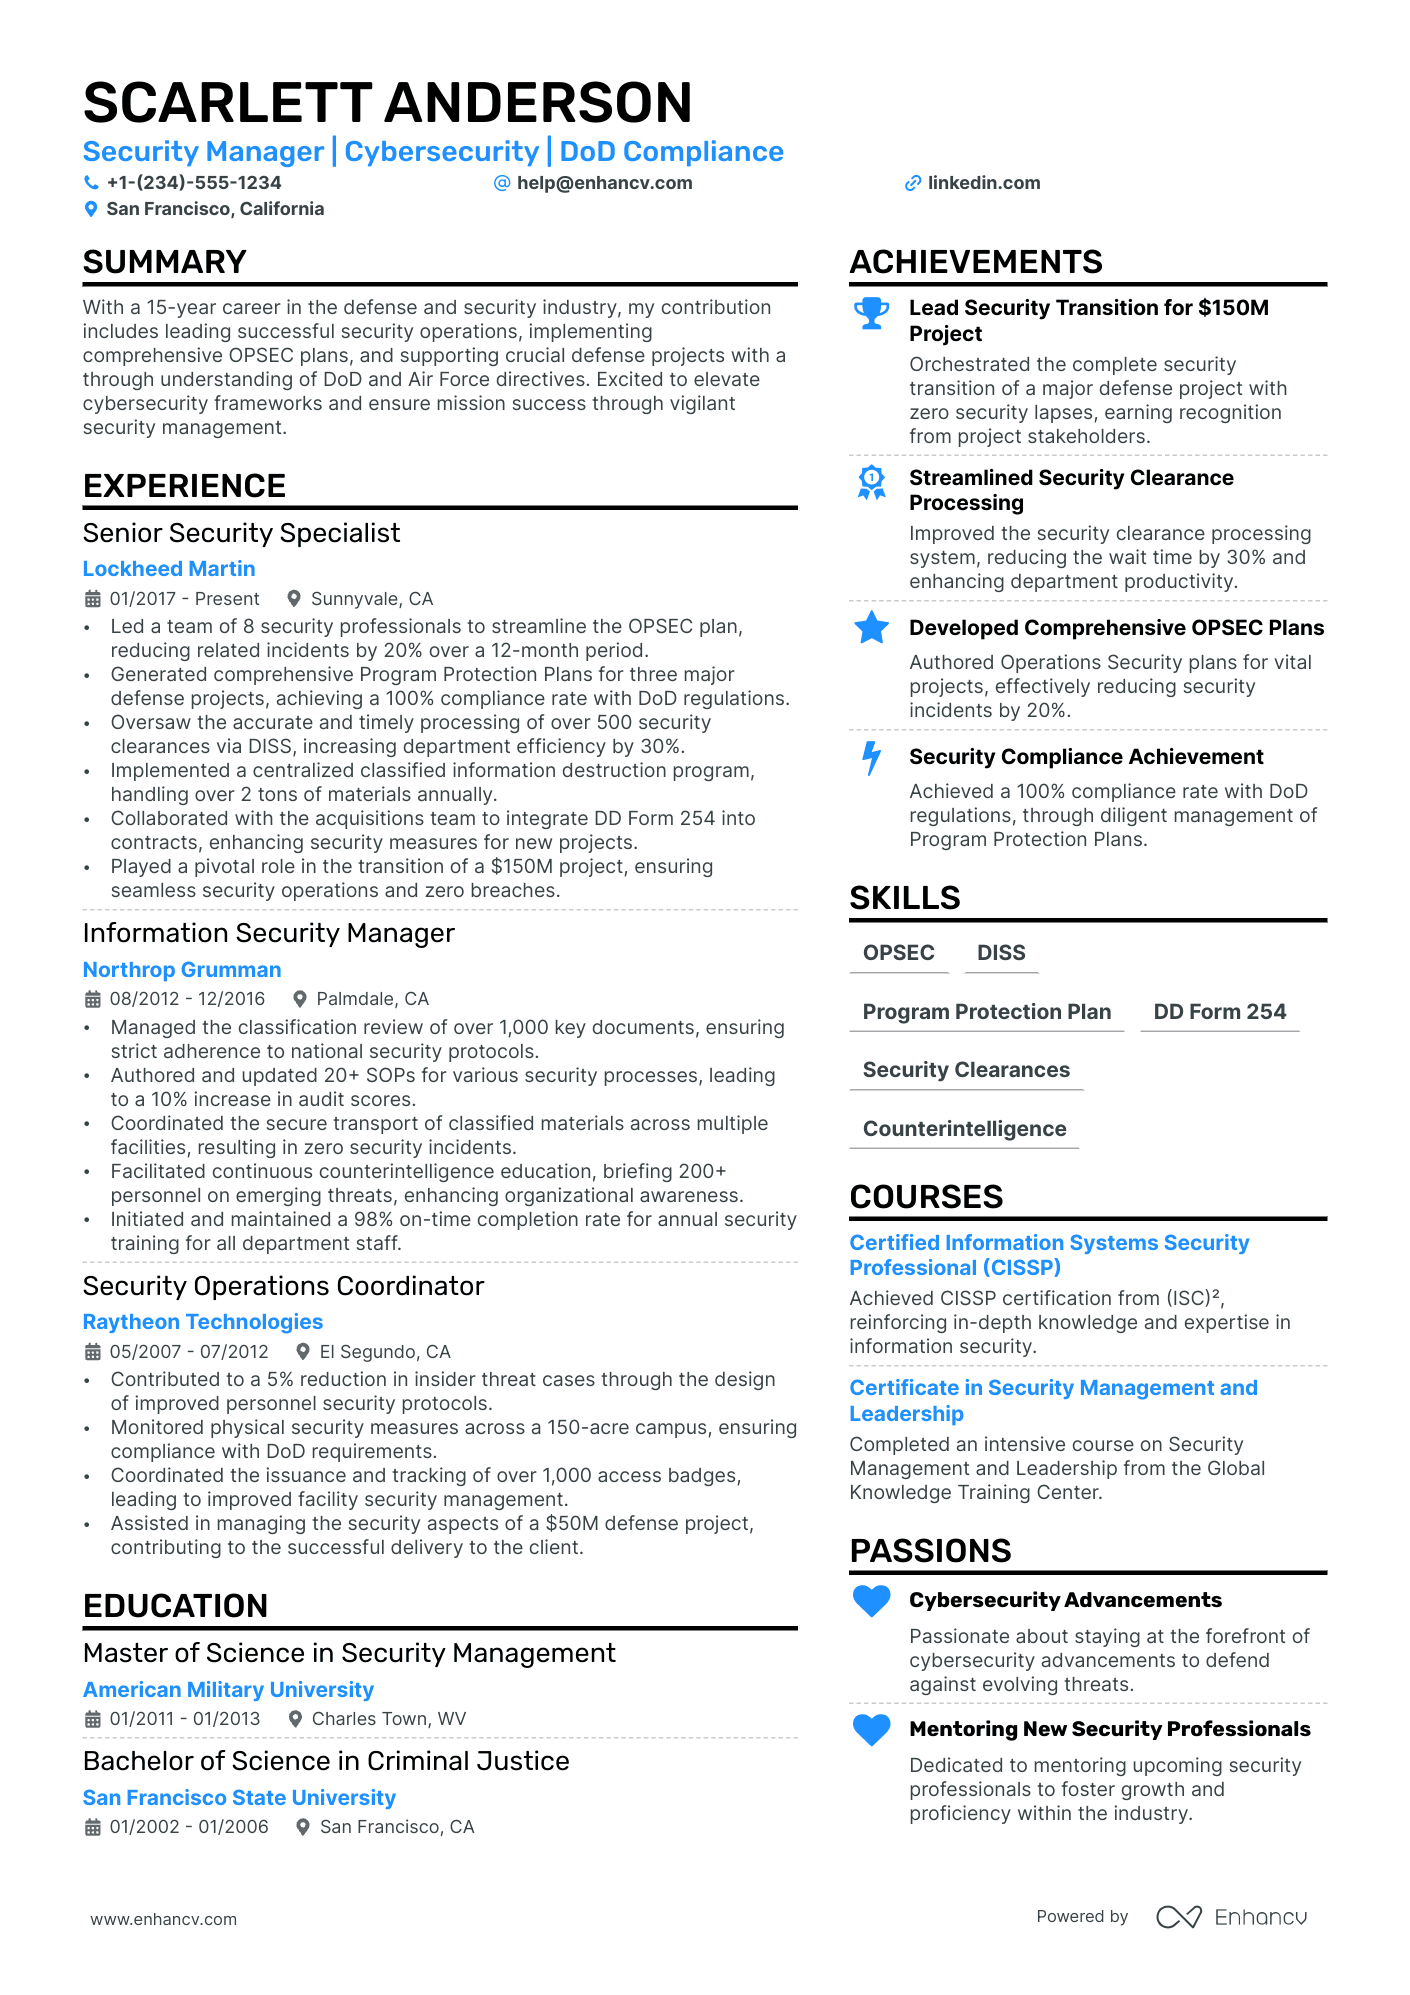 Security Manager resume example